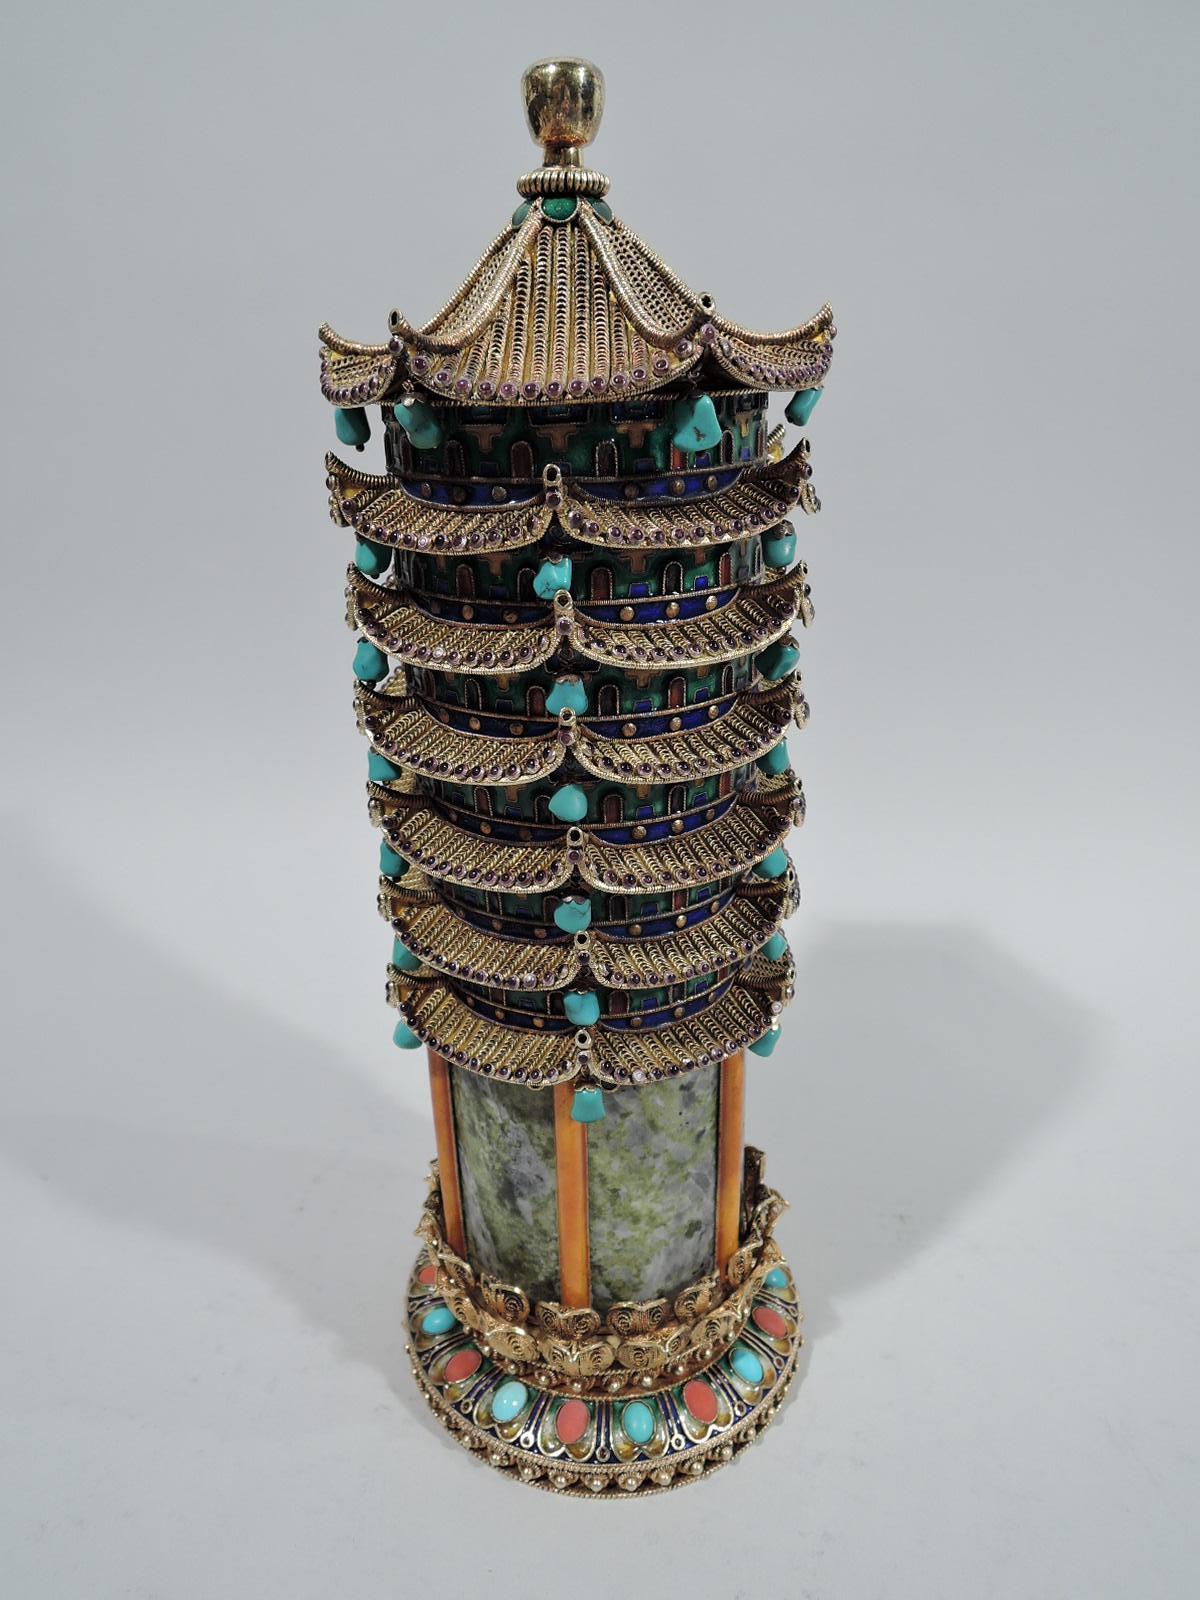 Chinese silver gilt, enamel, and marble pagoda box, ca 1920. Marble base with guilloche enamel pilasters and applied imbricated gilt filigree leaves, and raised foot with inset cabochon stones on enameled ground. Top has patterned enamel ground and